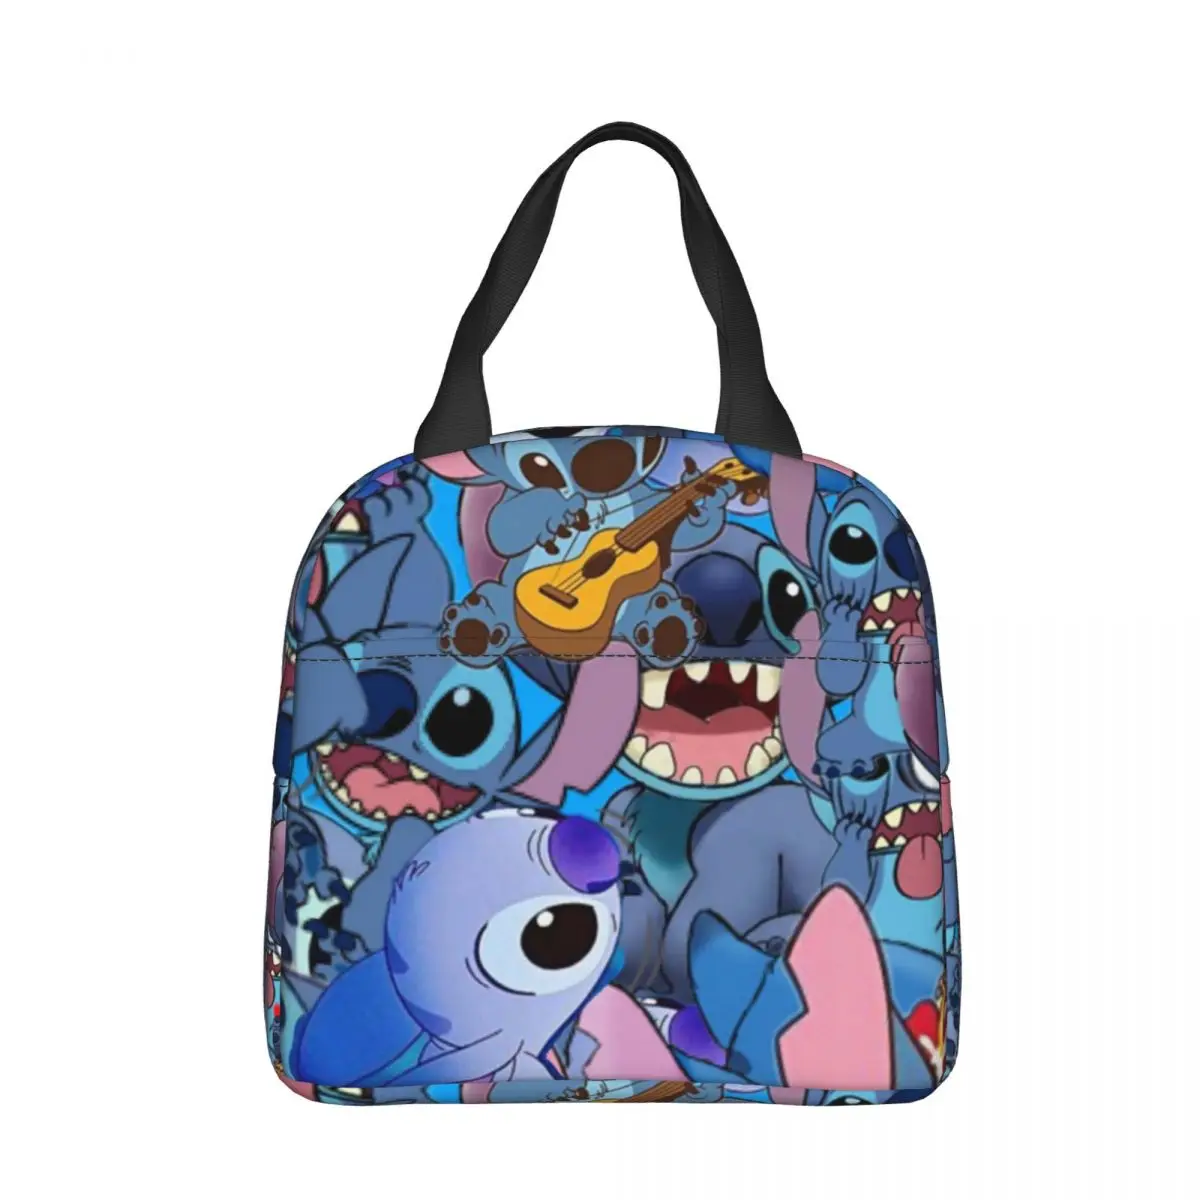 

Disney Lilo And Stitch Insulated Lunch Bags Thermal Bag Lunch Container Cartoon Large Tote Lunch Box Girl Boy School Outdoor